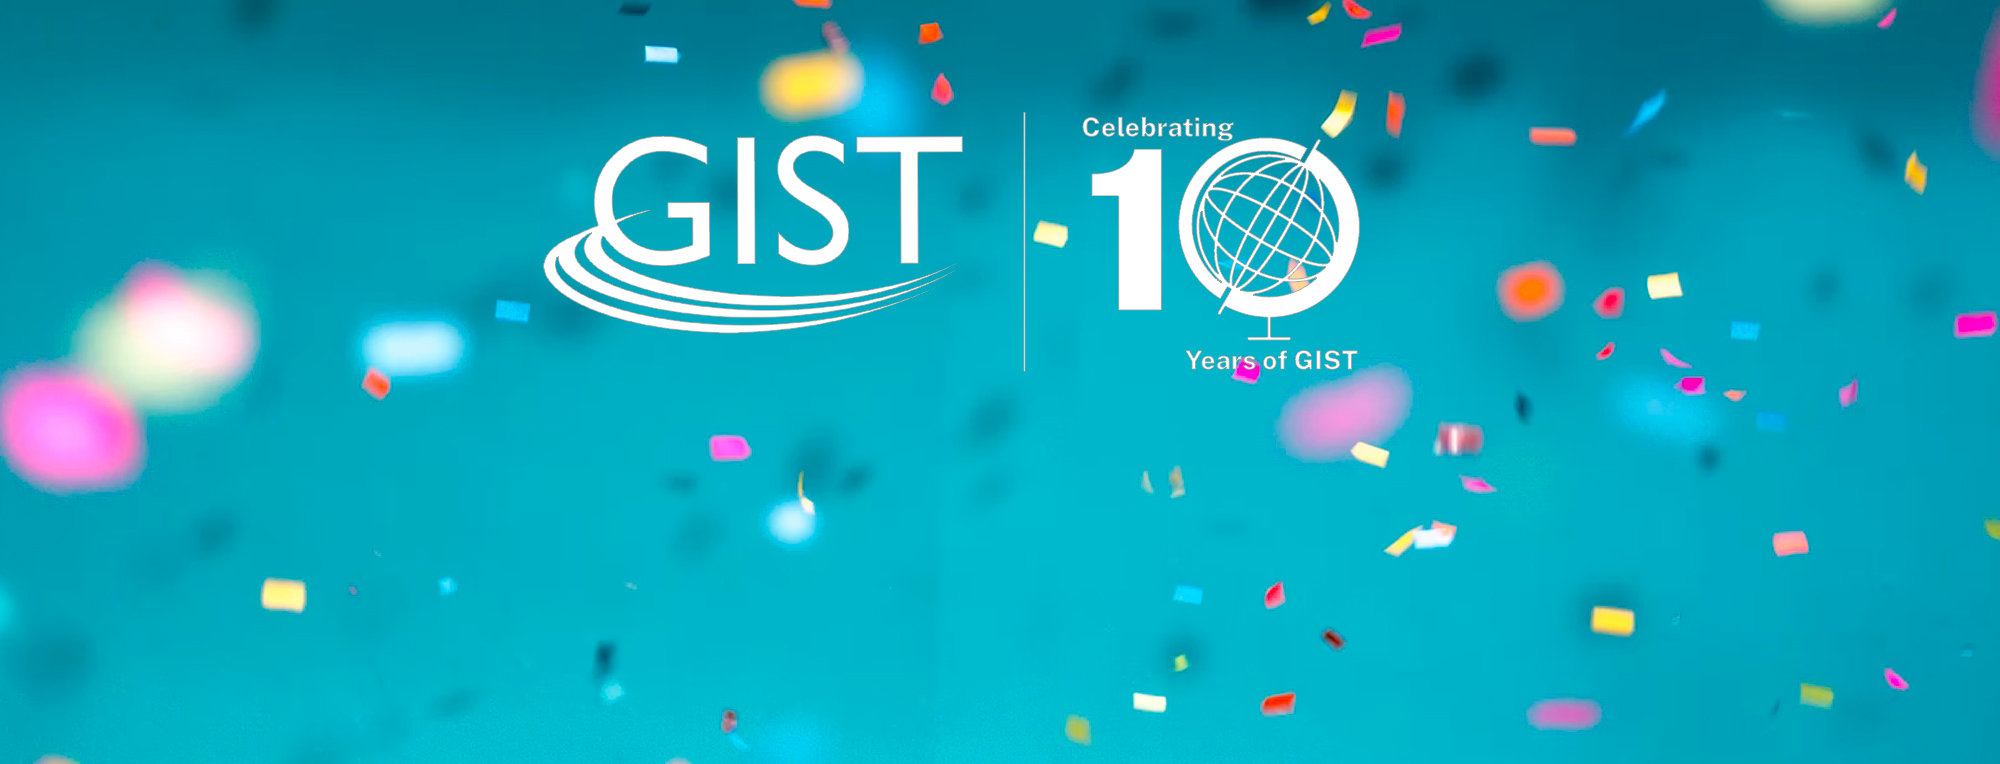 Join the celebrations as GIST turns 10!